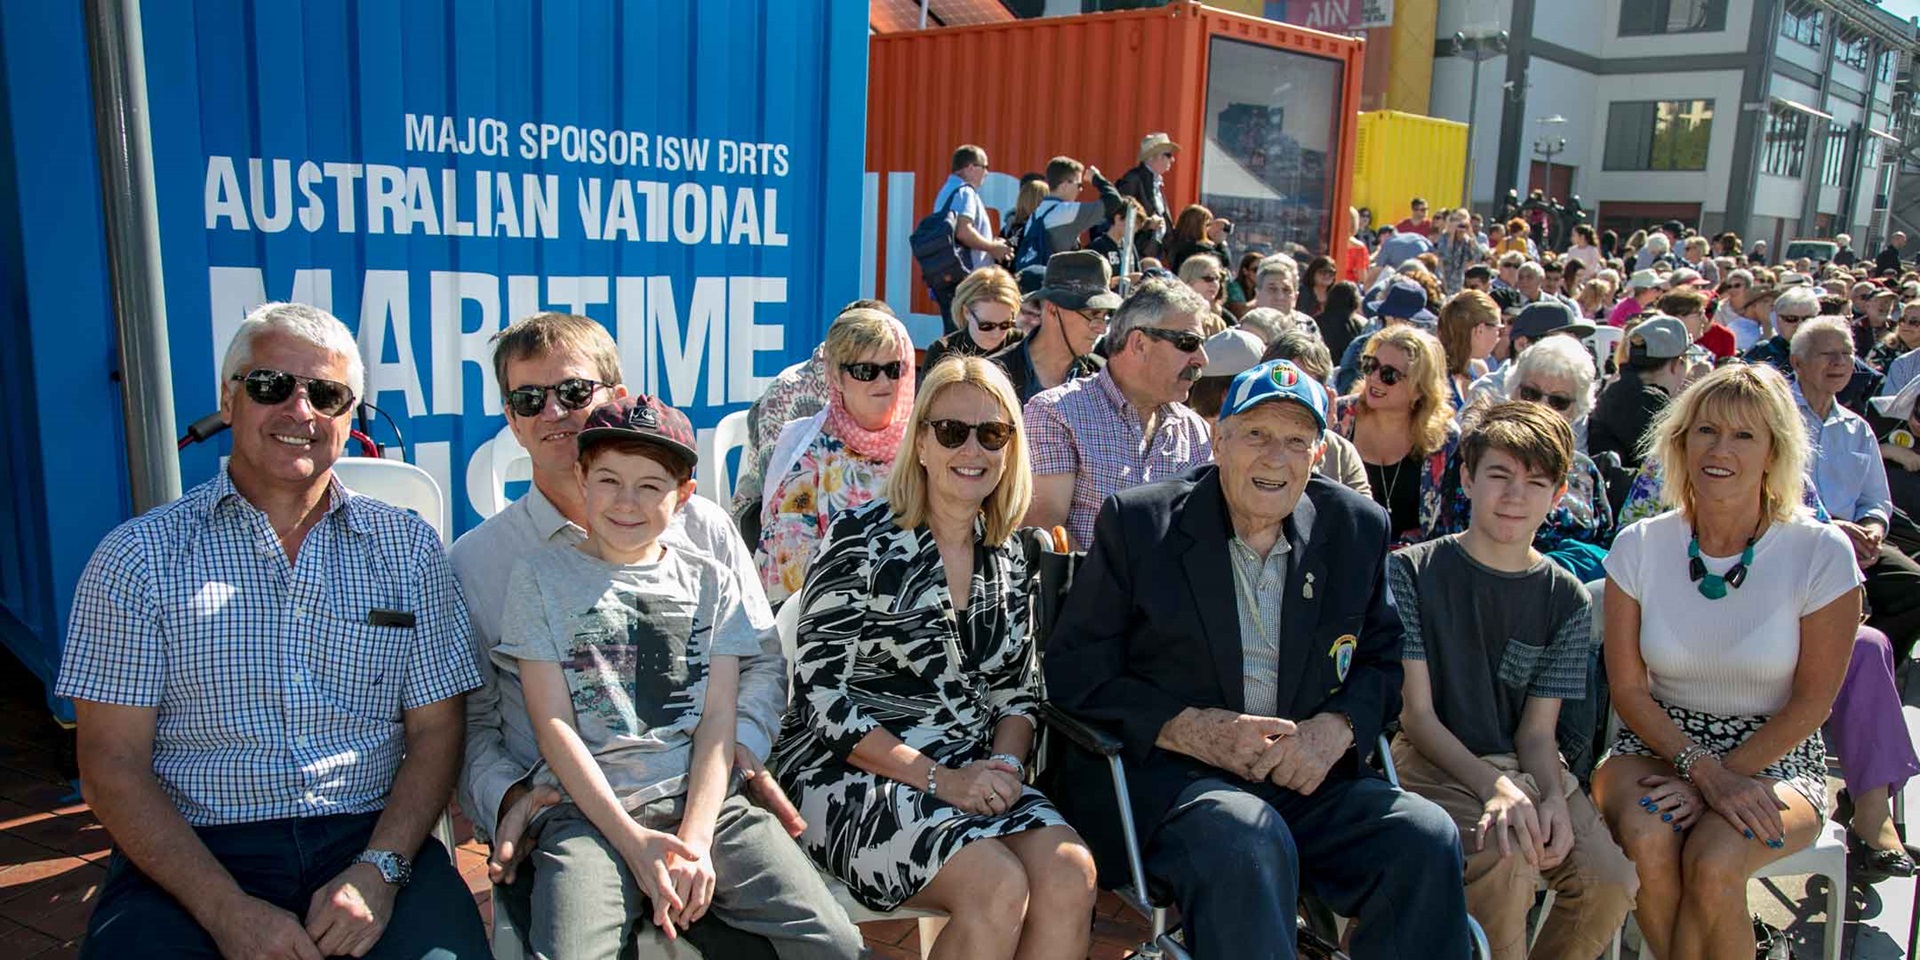 Welcome Wall unveiling ceremony, Australian National Maritime Museum 2018